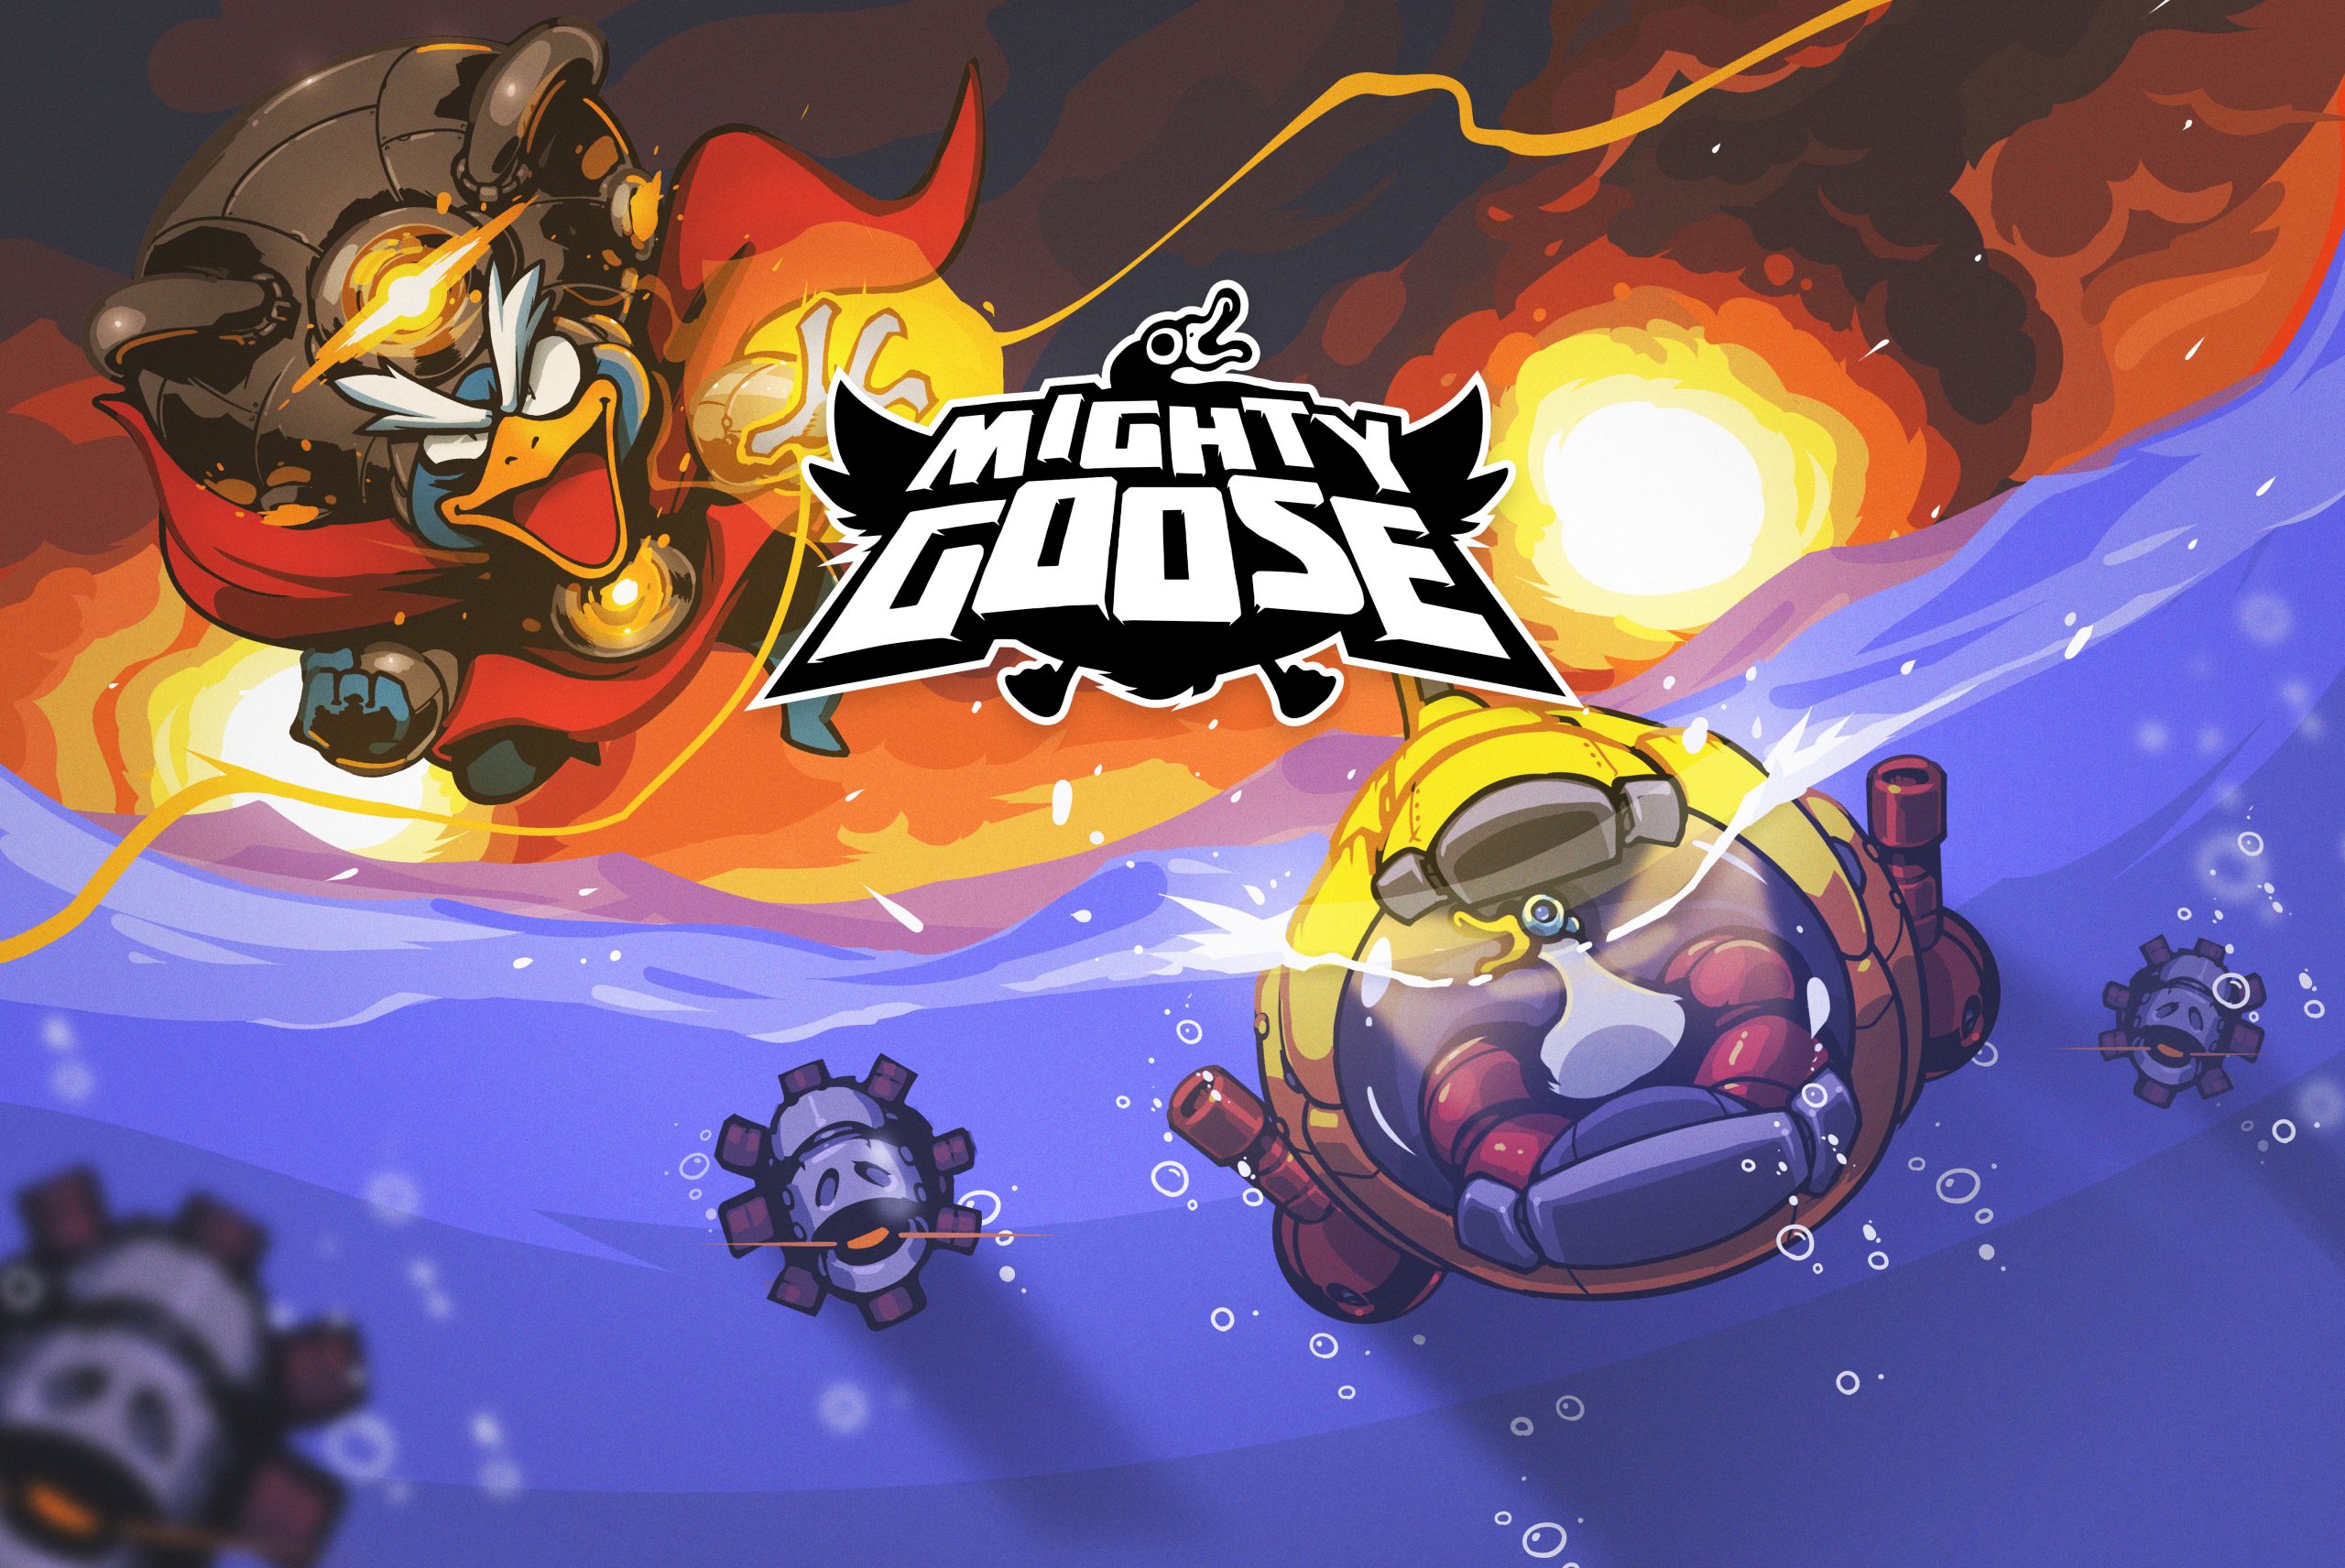 Unleash Destruction and Mayhem in 2D Action Game  Mighty Goose!  Free DLC Update Coming on April 19th!